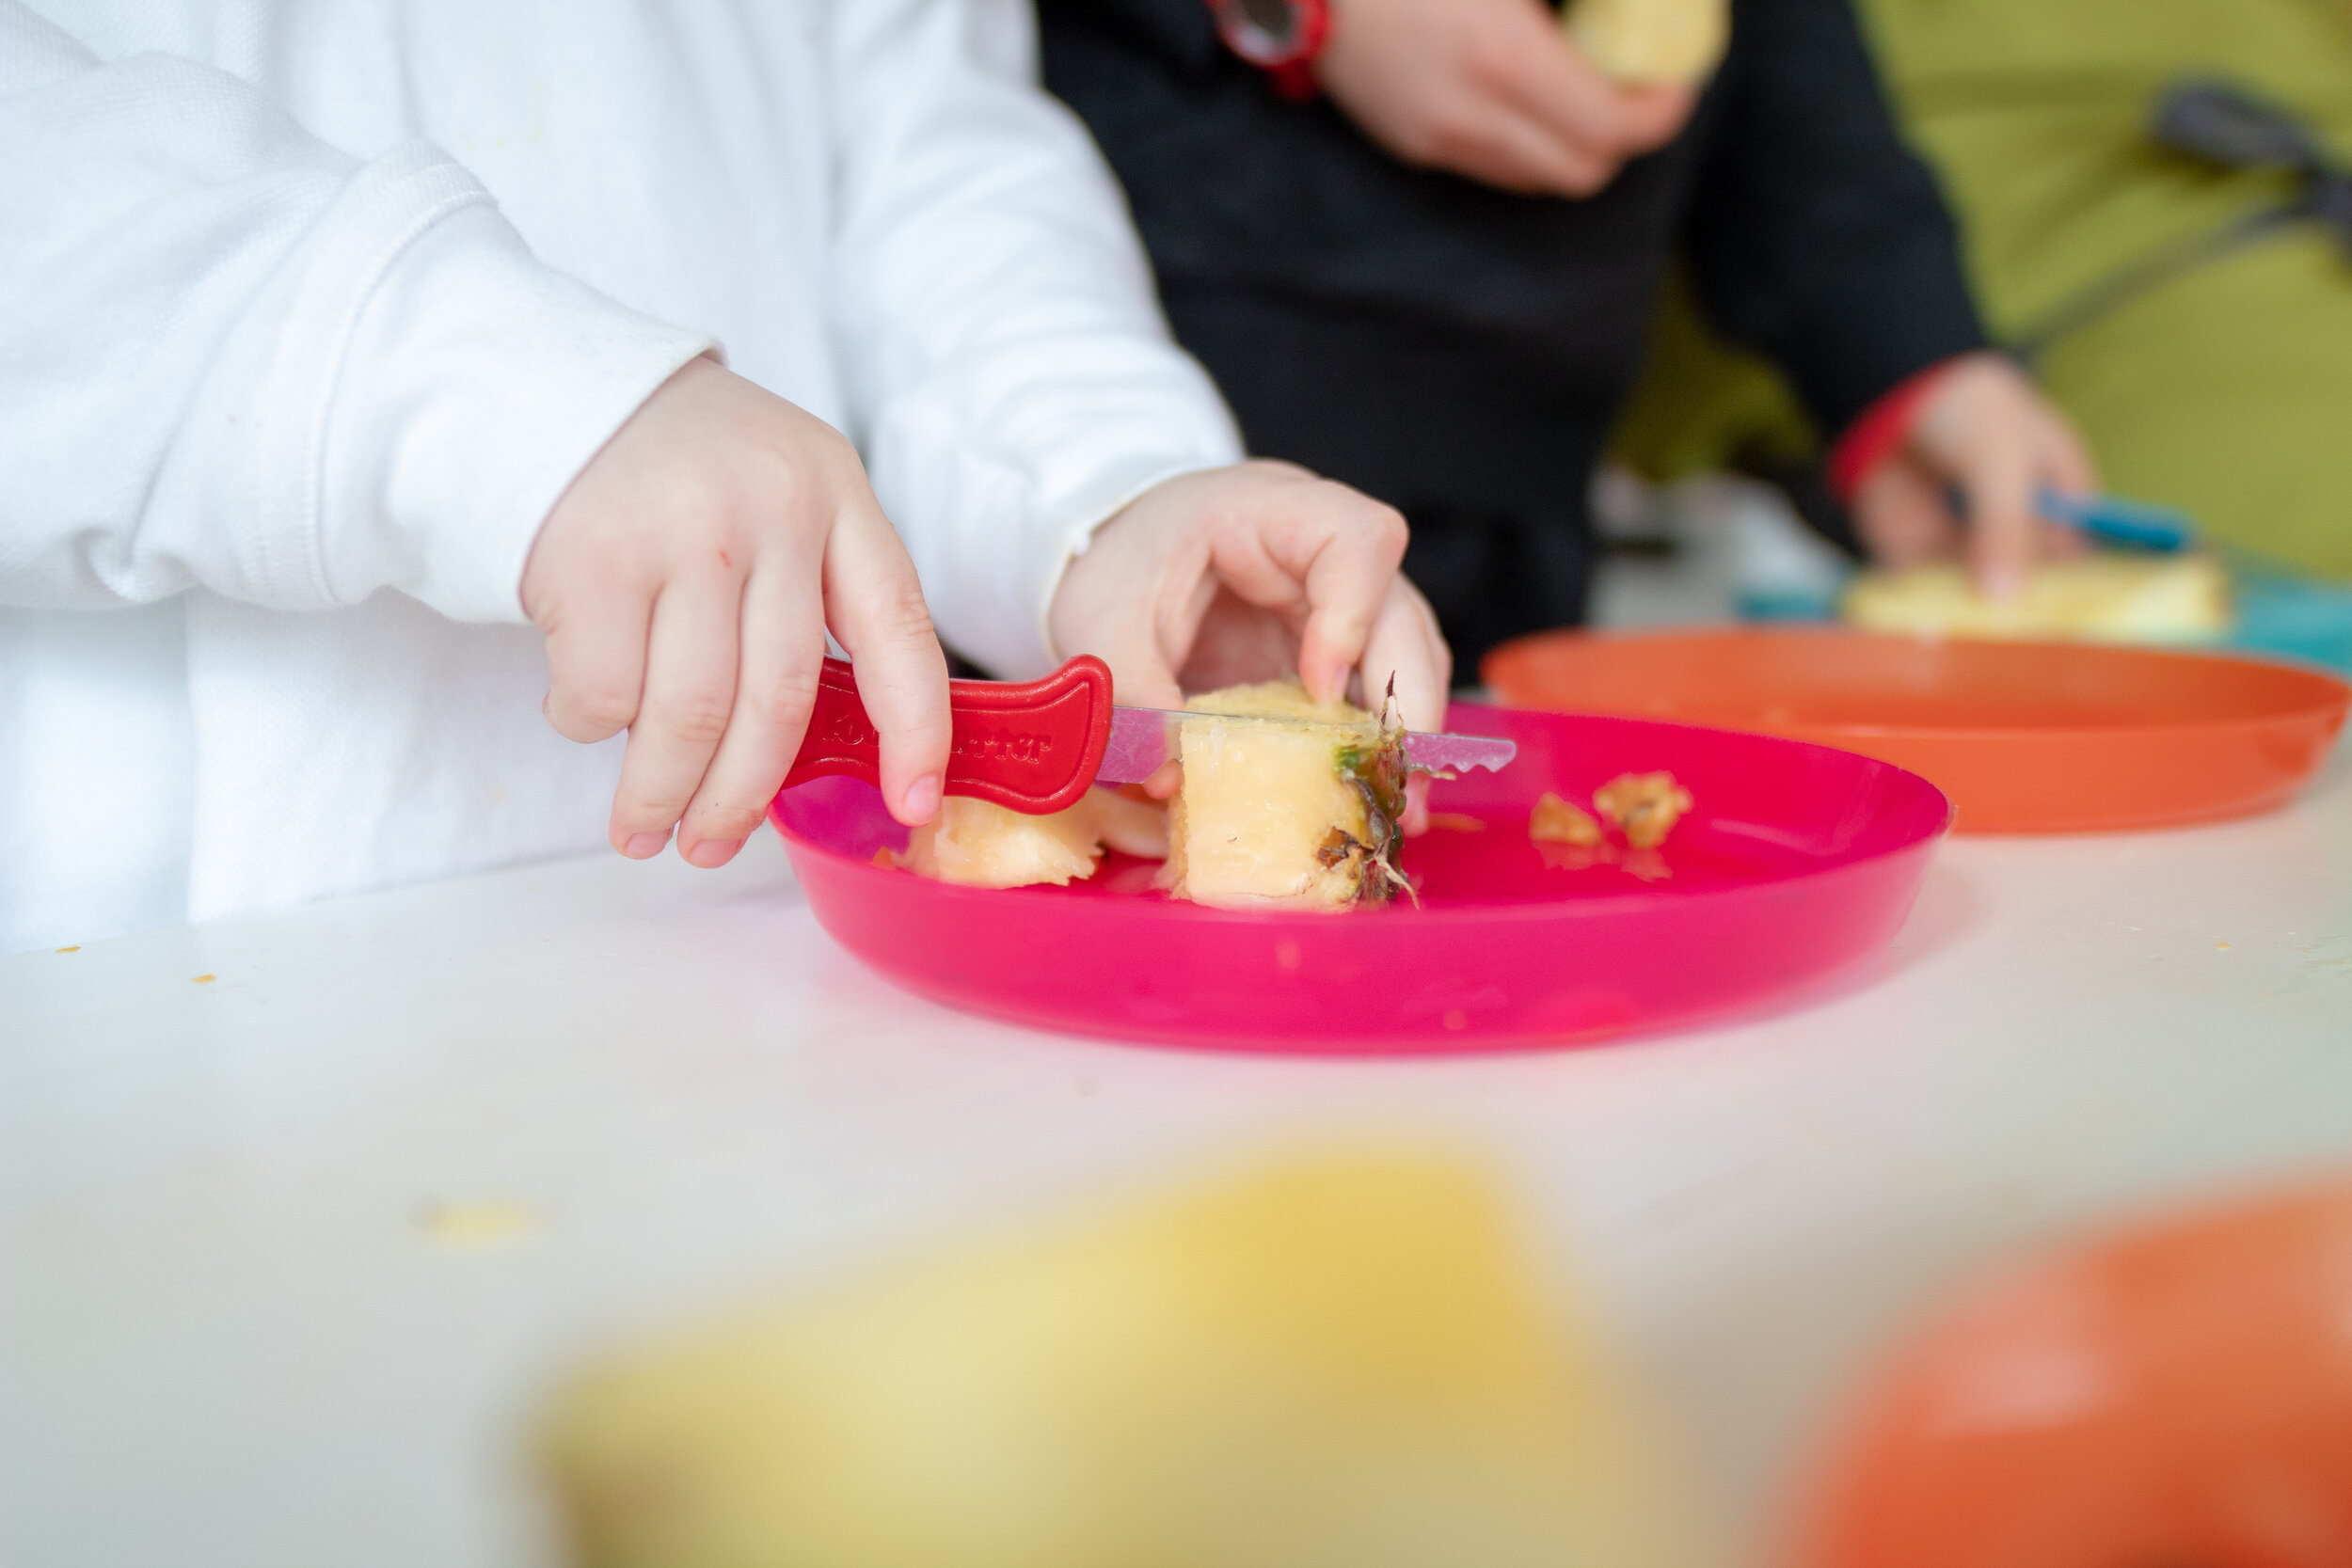 Deirdre Doyle from the Cool Food School Heathy birthday party cutting pineapple with a Kiddies Food Kutter.jpg